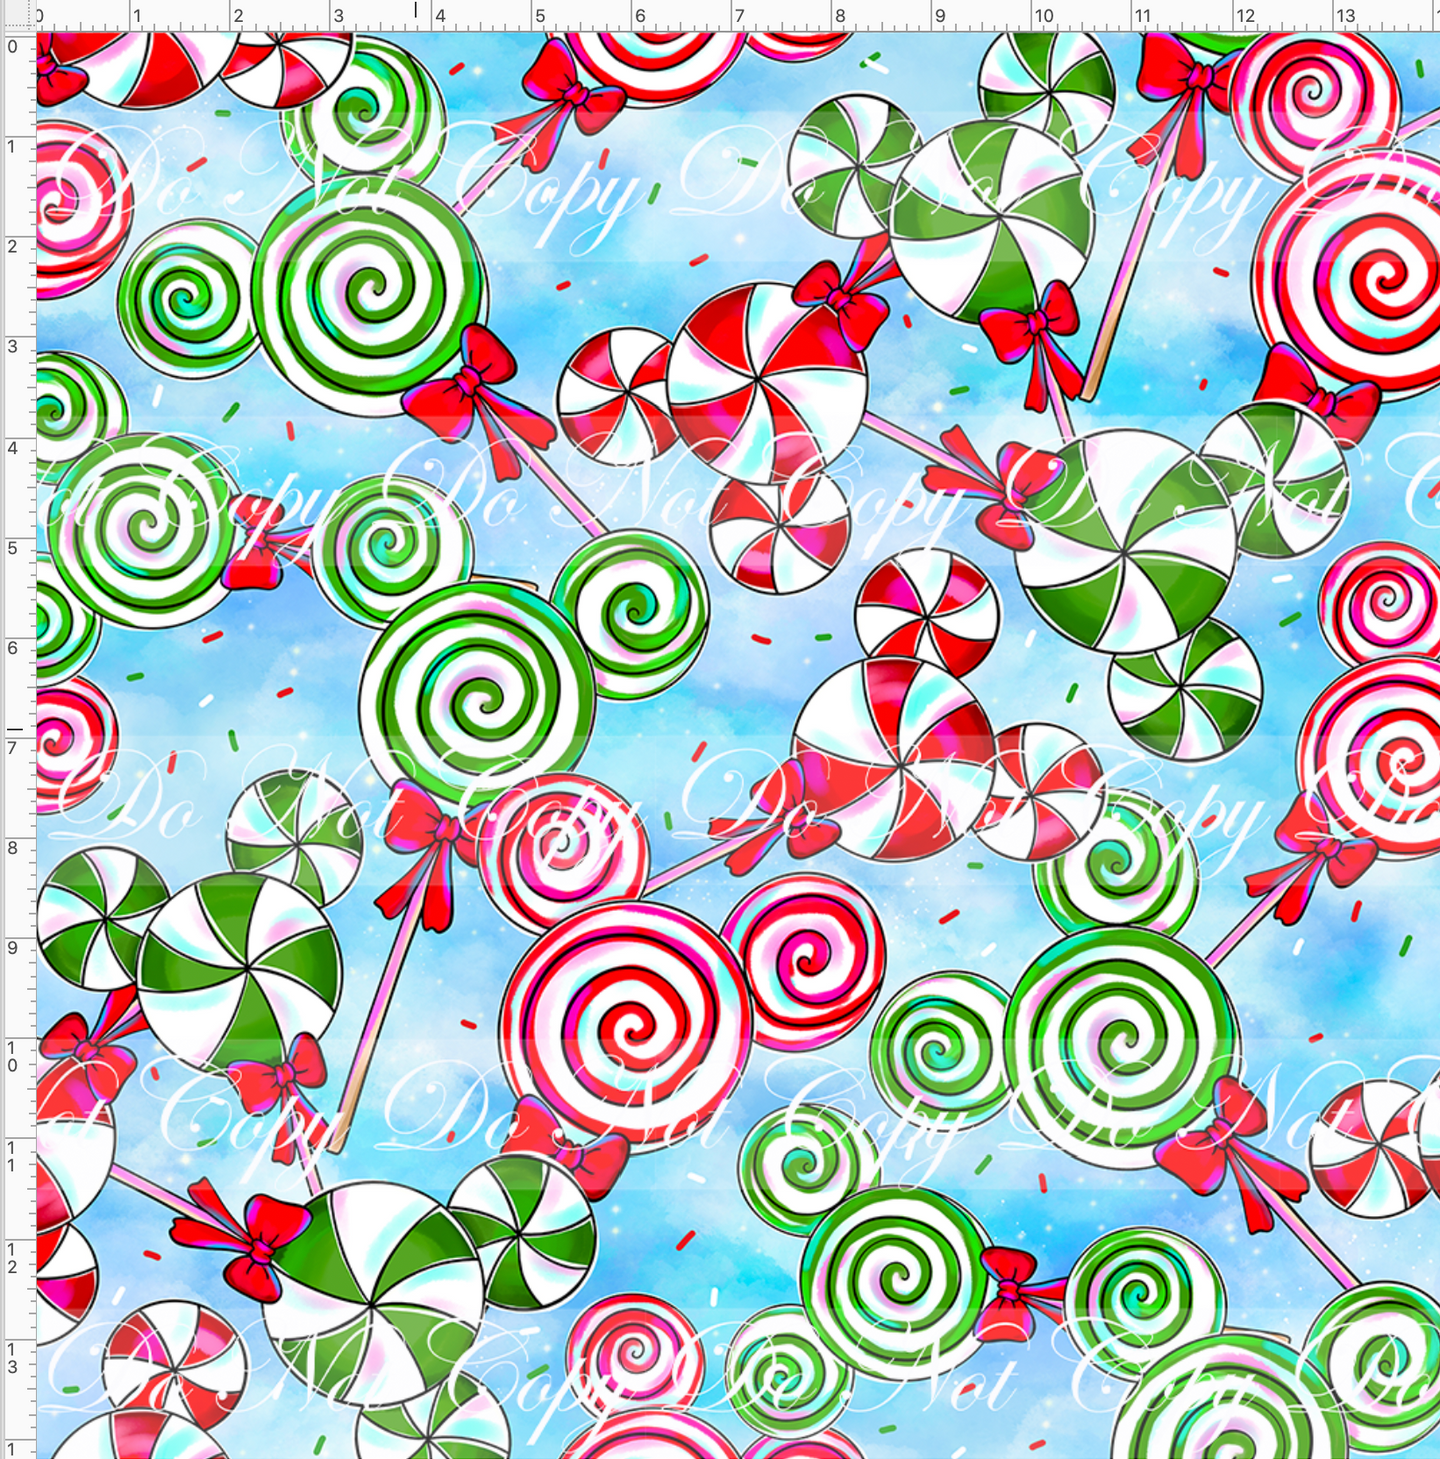 CATALOG - PREORDER - Christmas Parade - Peppermints - LARGE SCALE